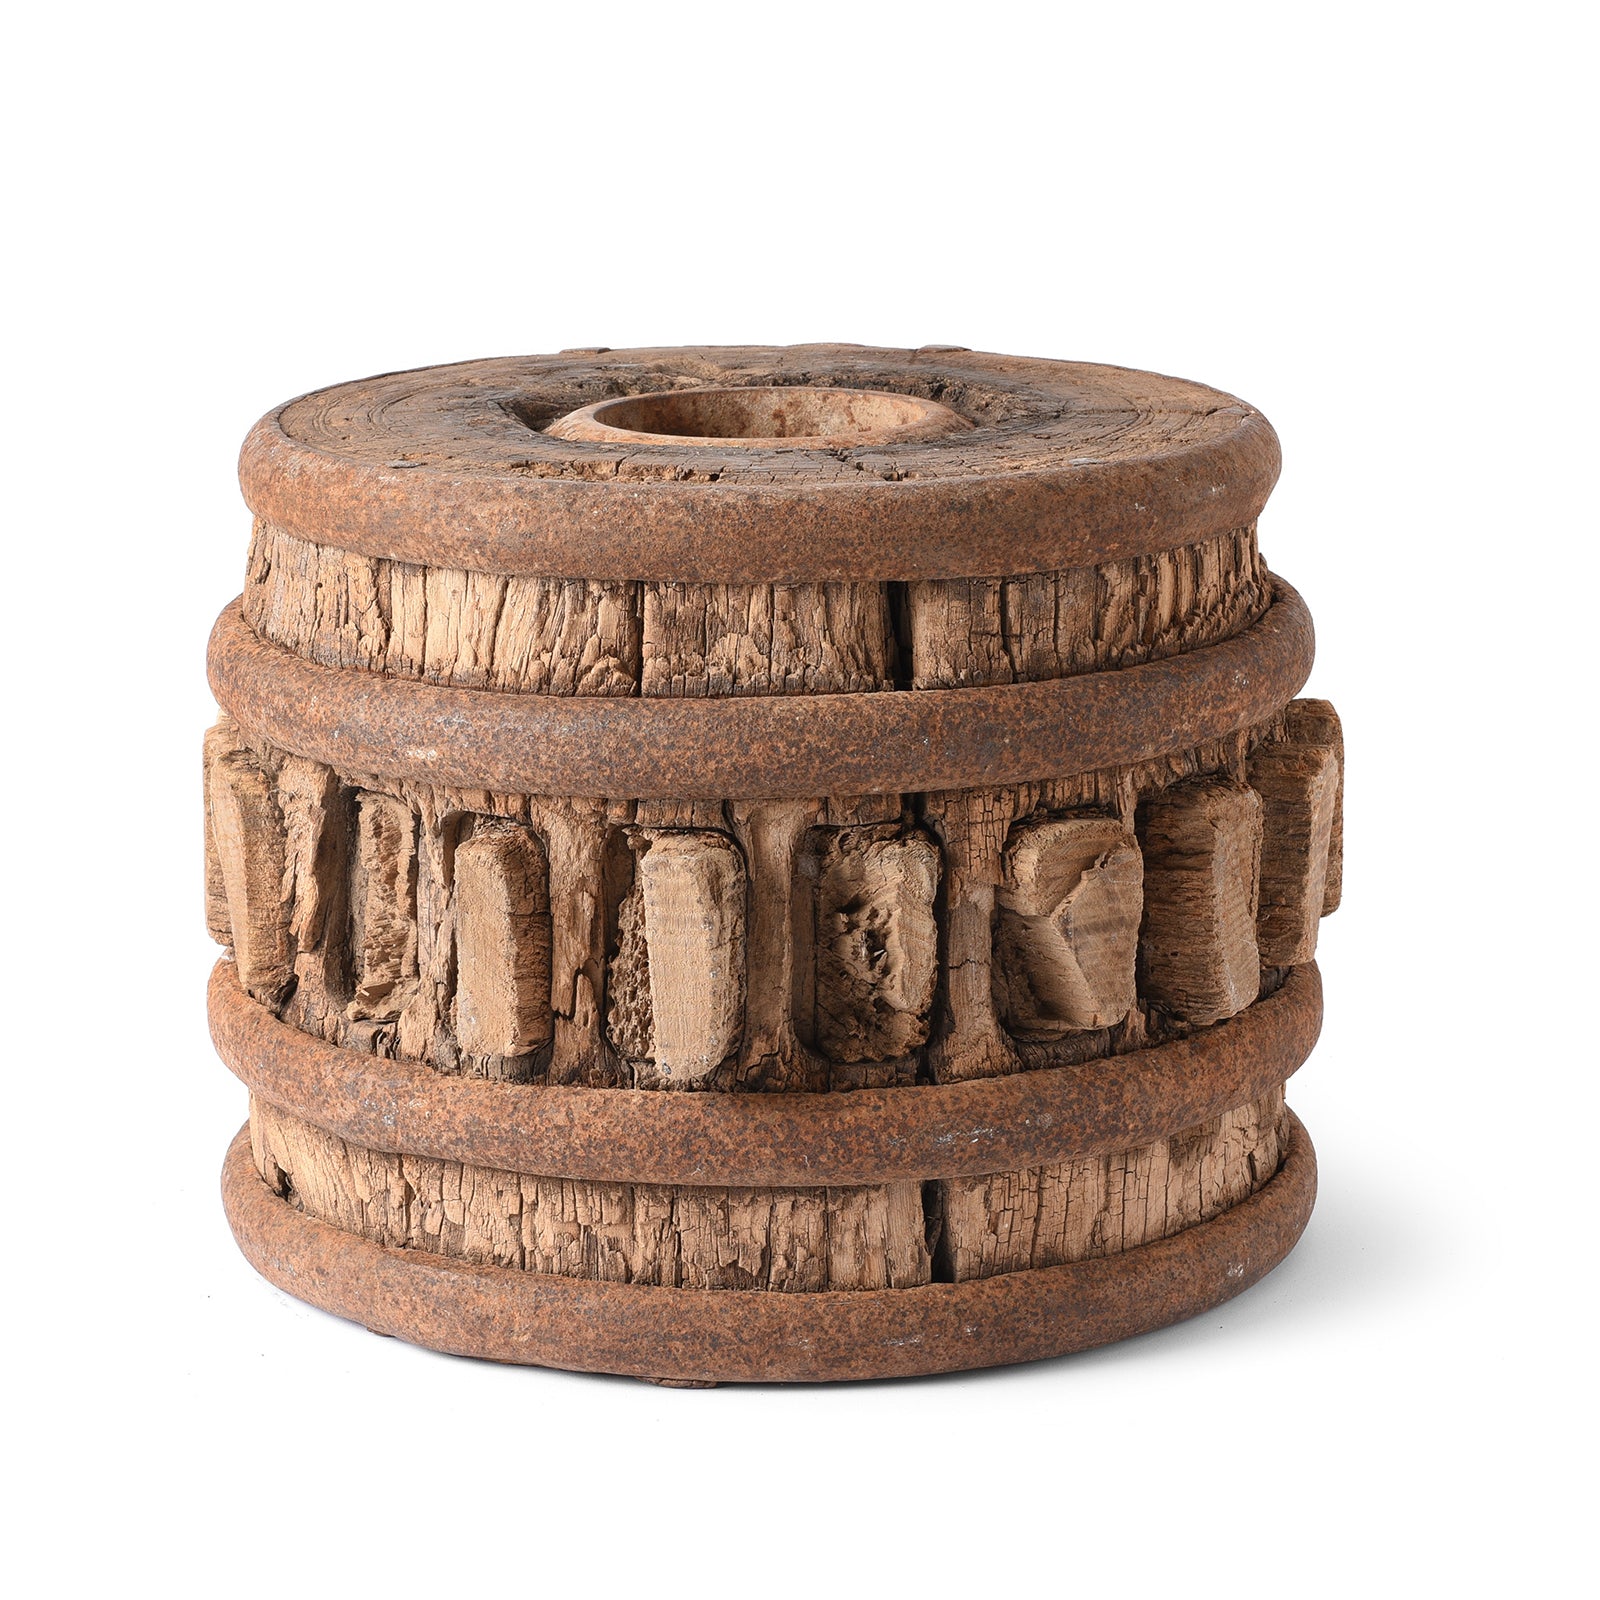 Old Wheel Hub From Shandong Province - 19thC | Indigo Antiques